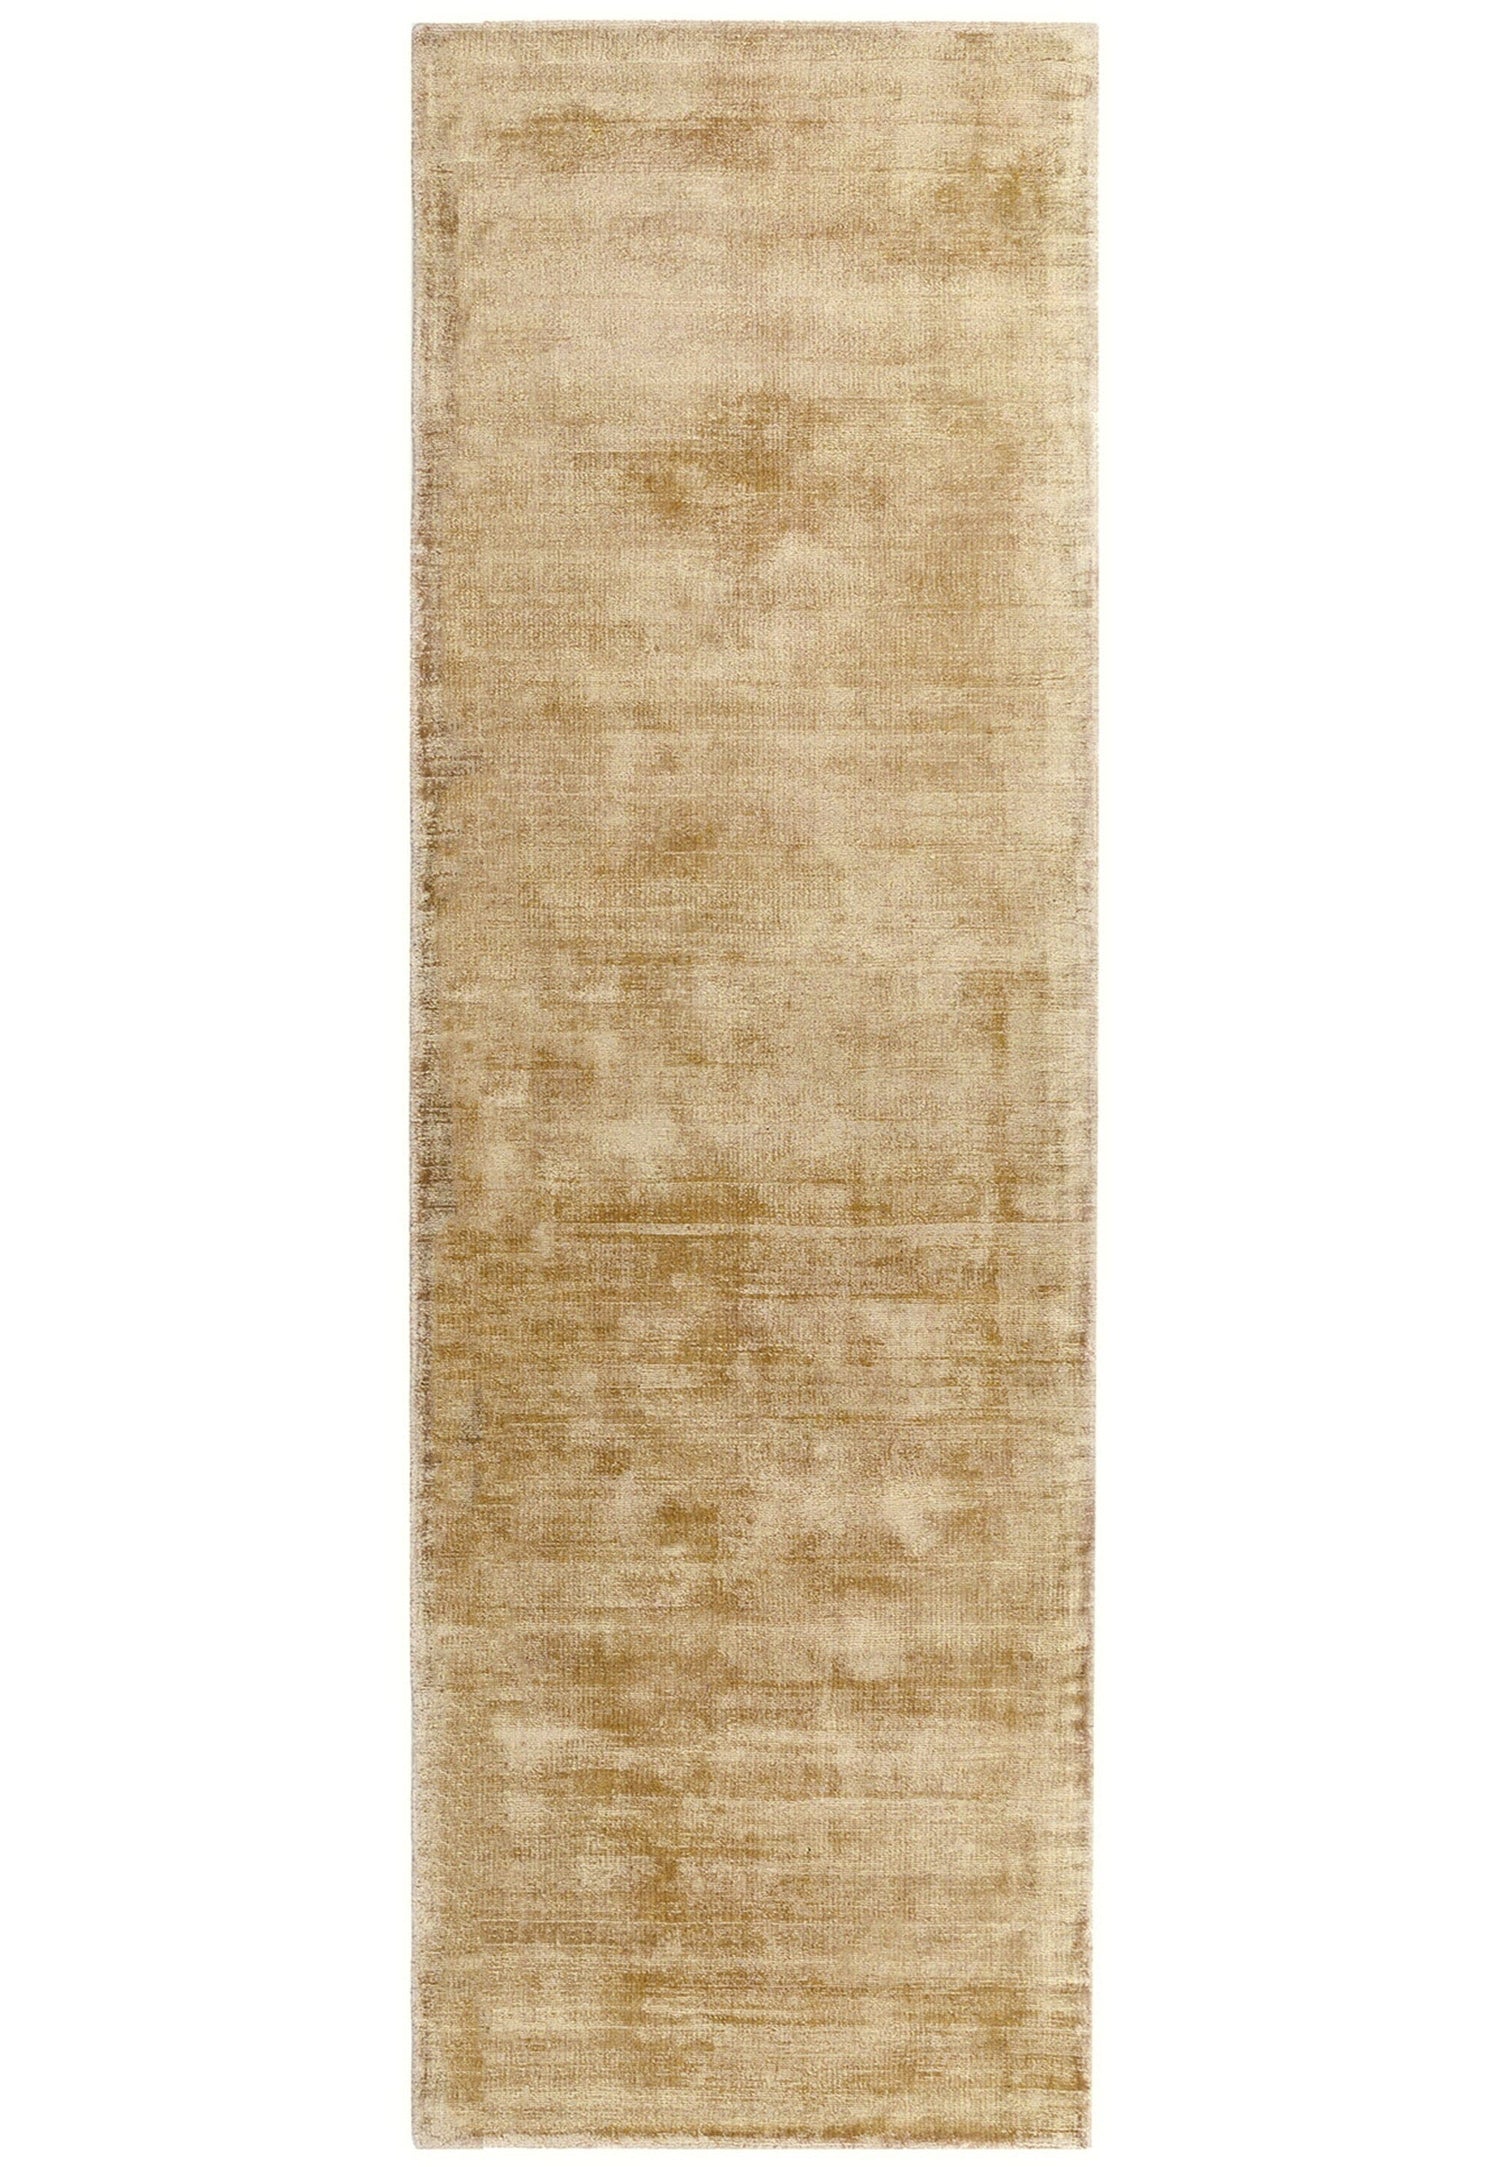  Asiatic Carpets-Asiatic Carpets Blade Hand Woven Rug Soft Gold - 160 x 230cm-Yellow, Gold 701 